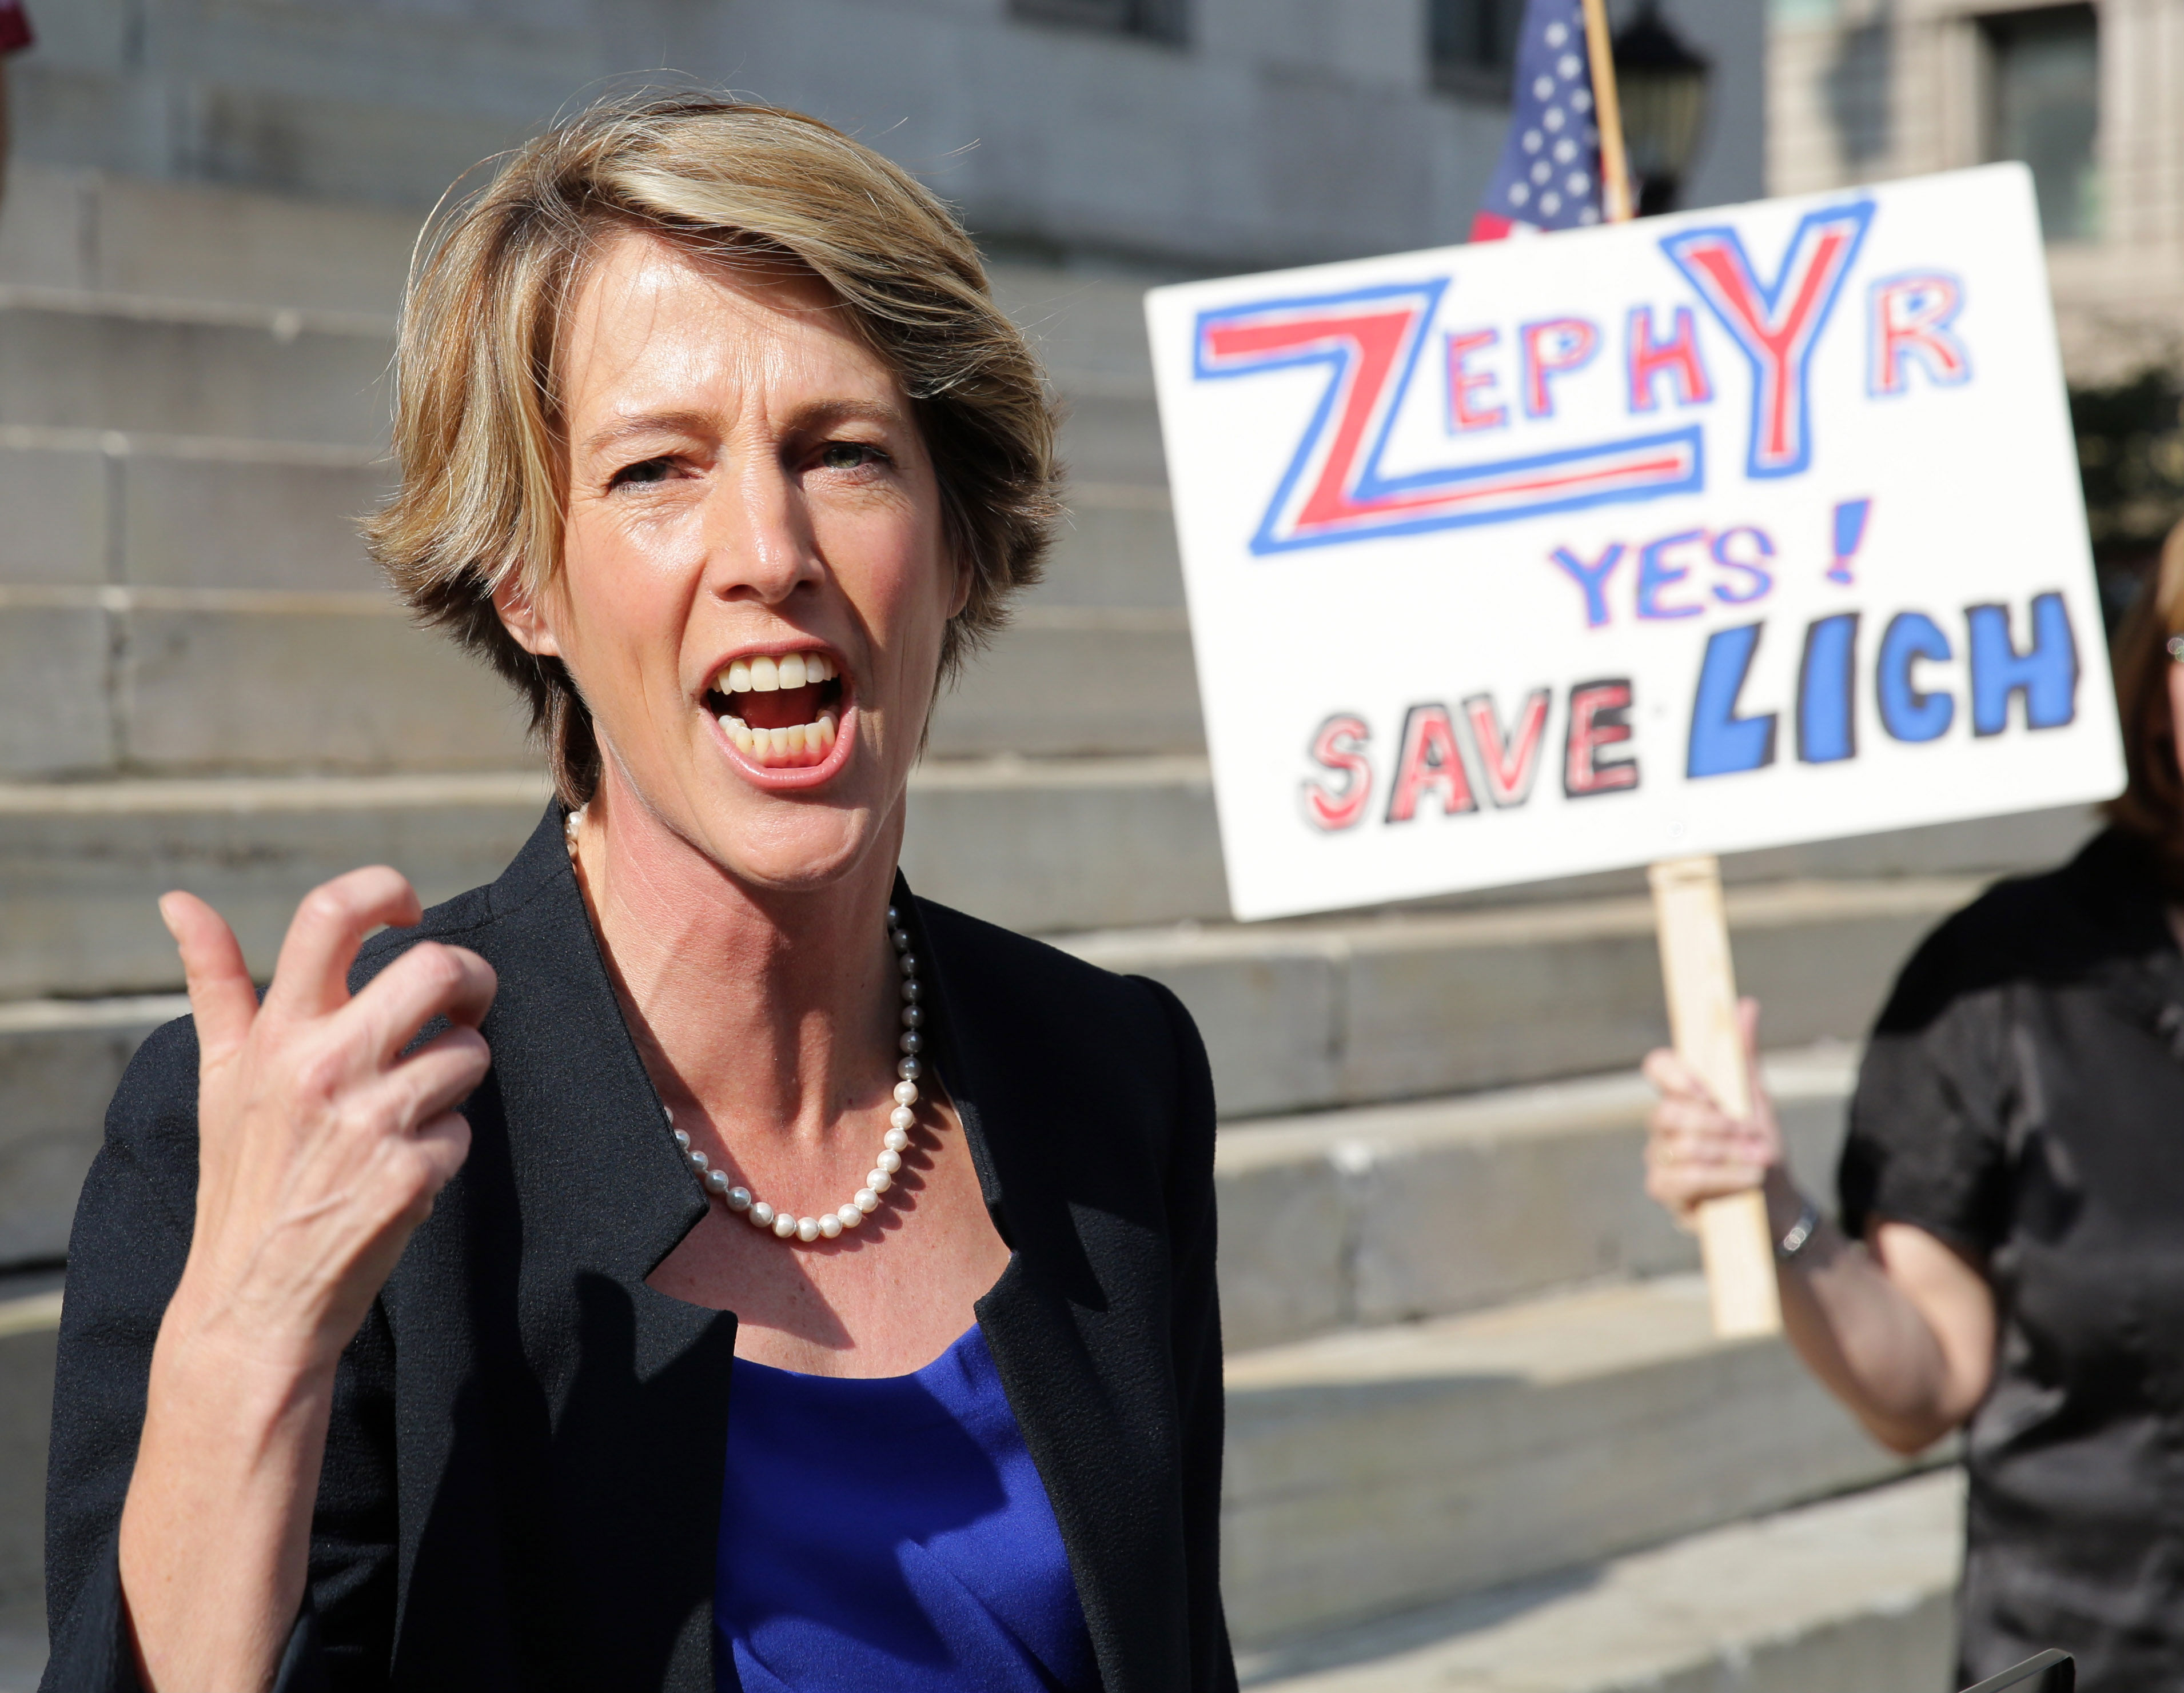 How Zephyr Teachout Became a Contender